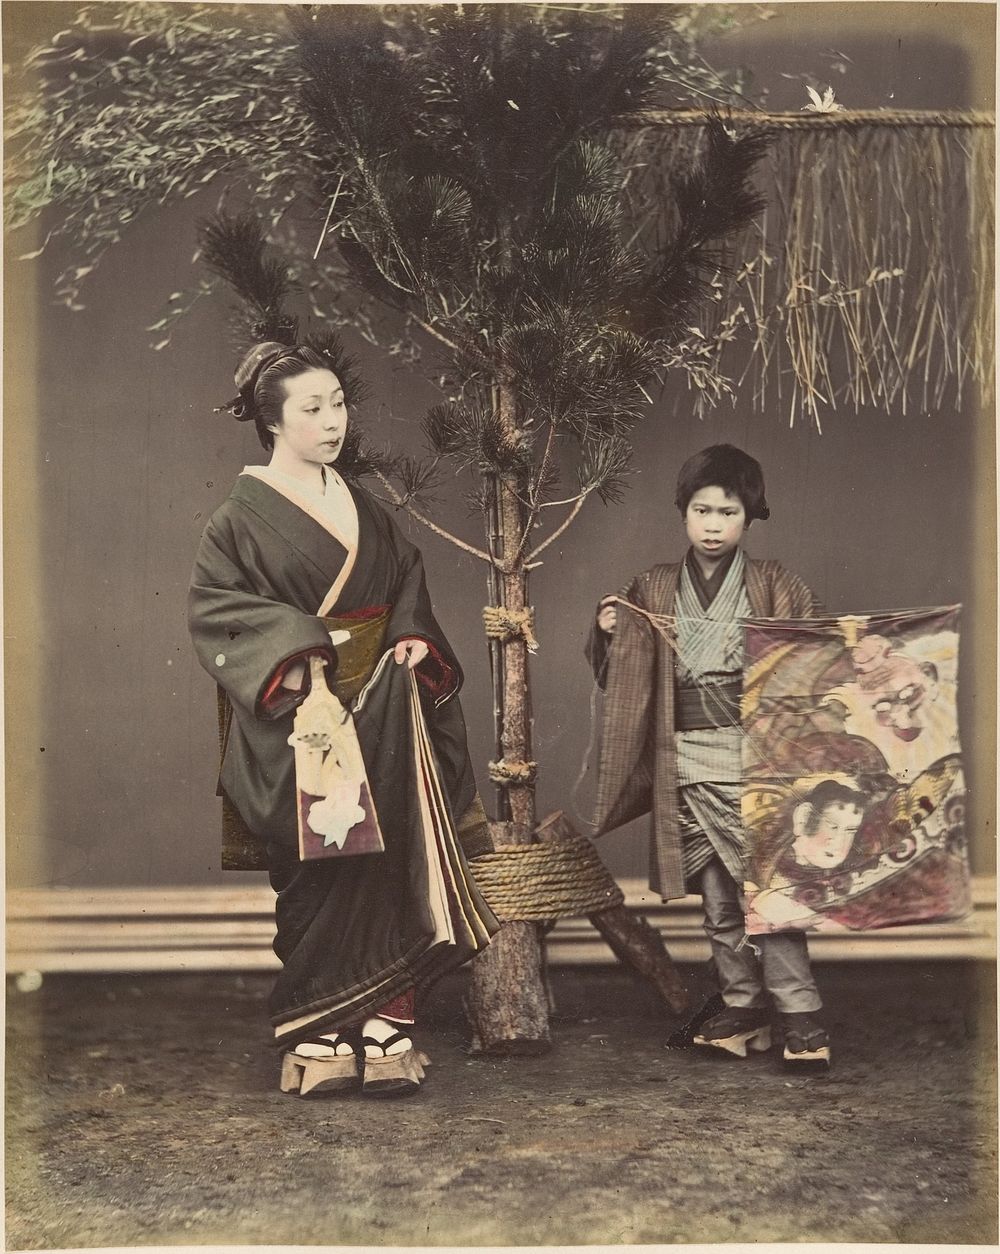 A Japanese Woman and a Japanese Boy in Traditional Dress by Suzuki Shin'ichi